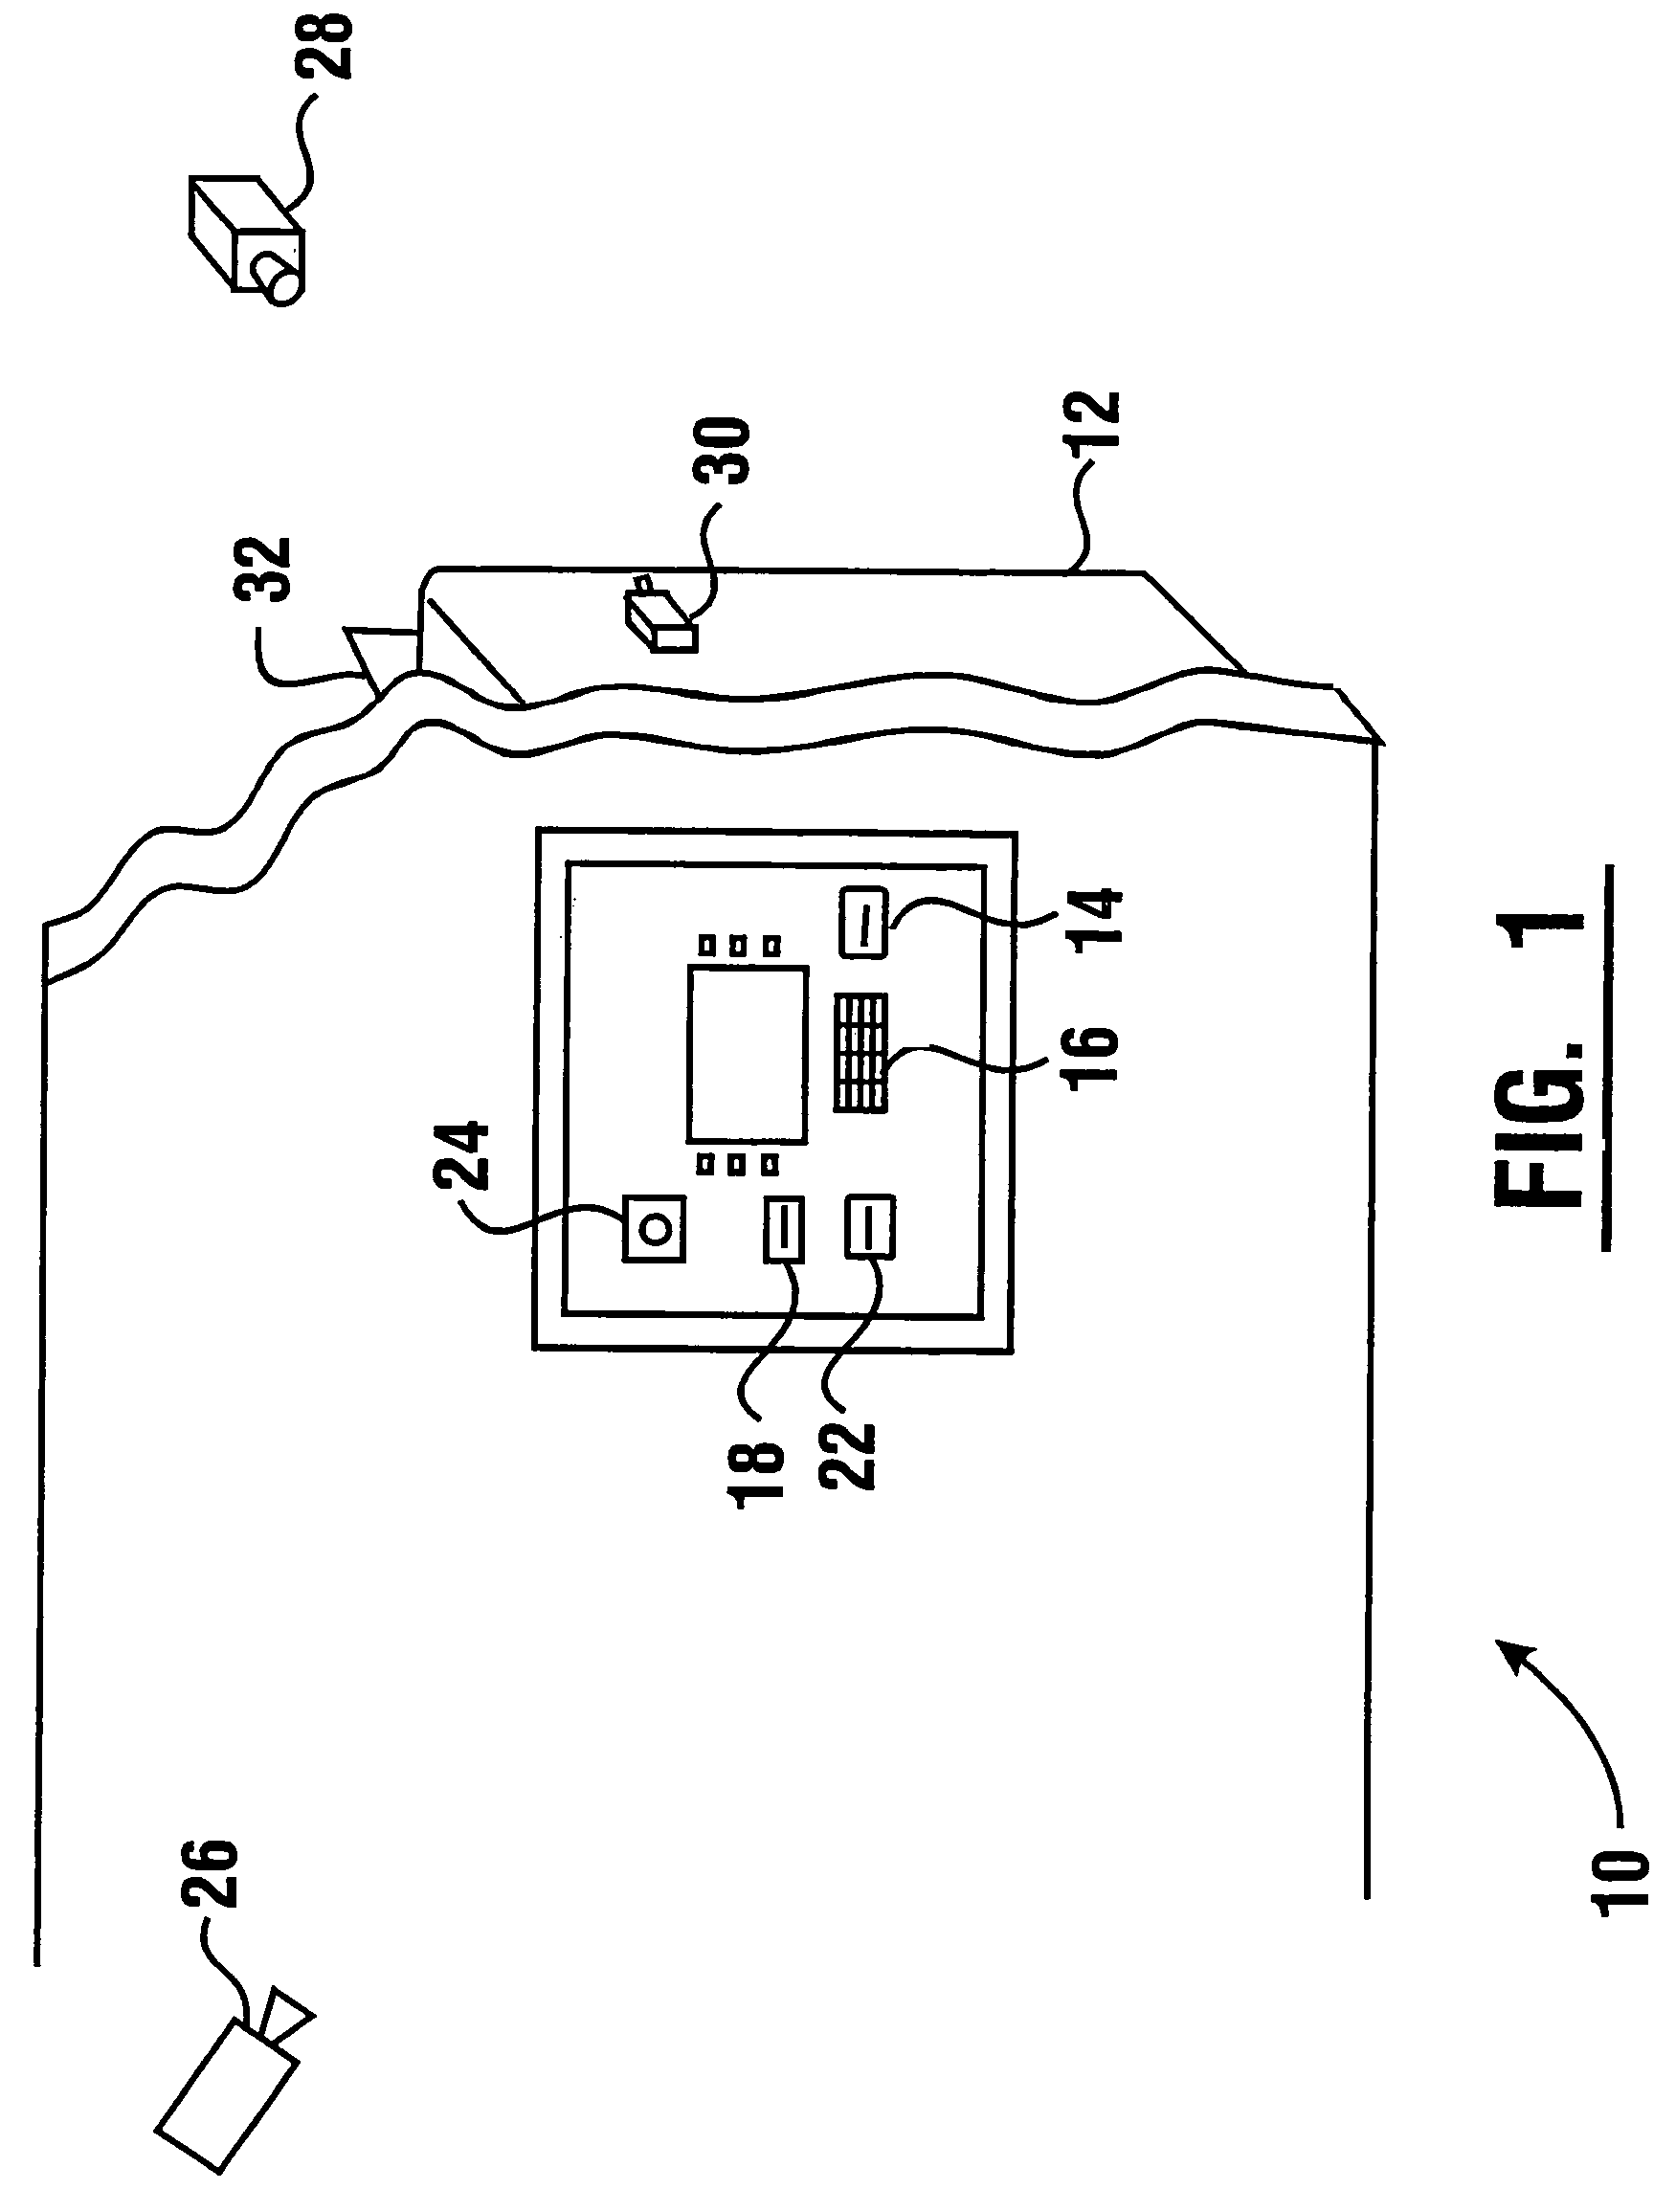 Reading of image data bearing record for comparison with stored user image in authorizing automated banking machine access